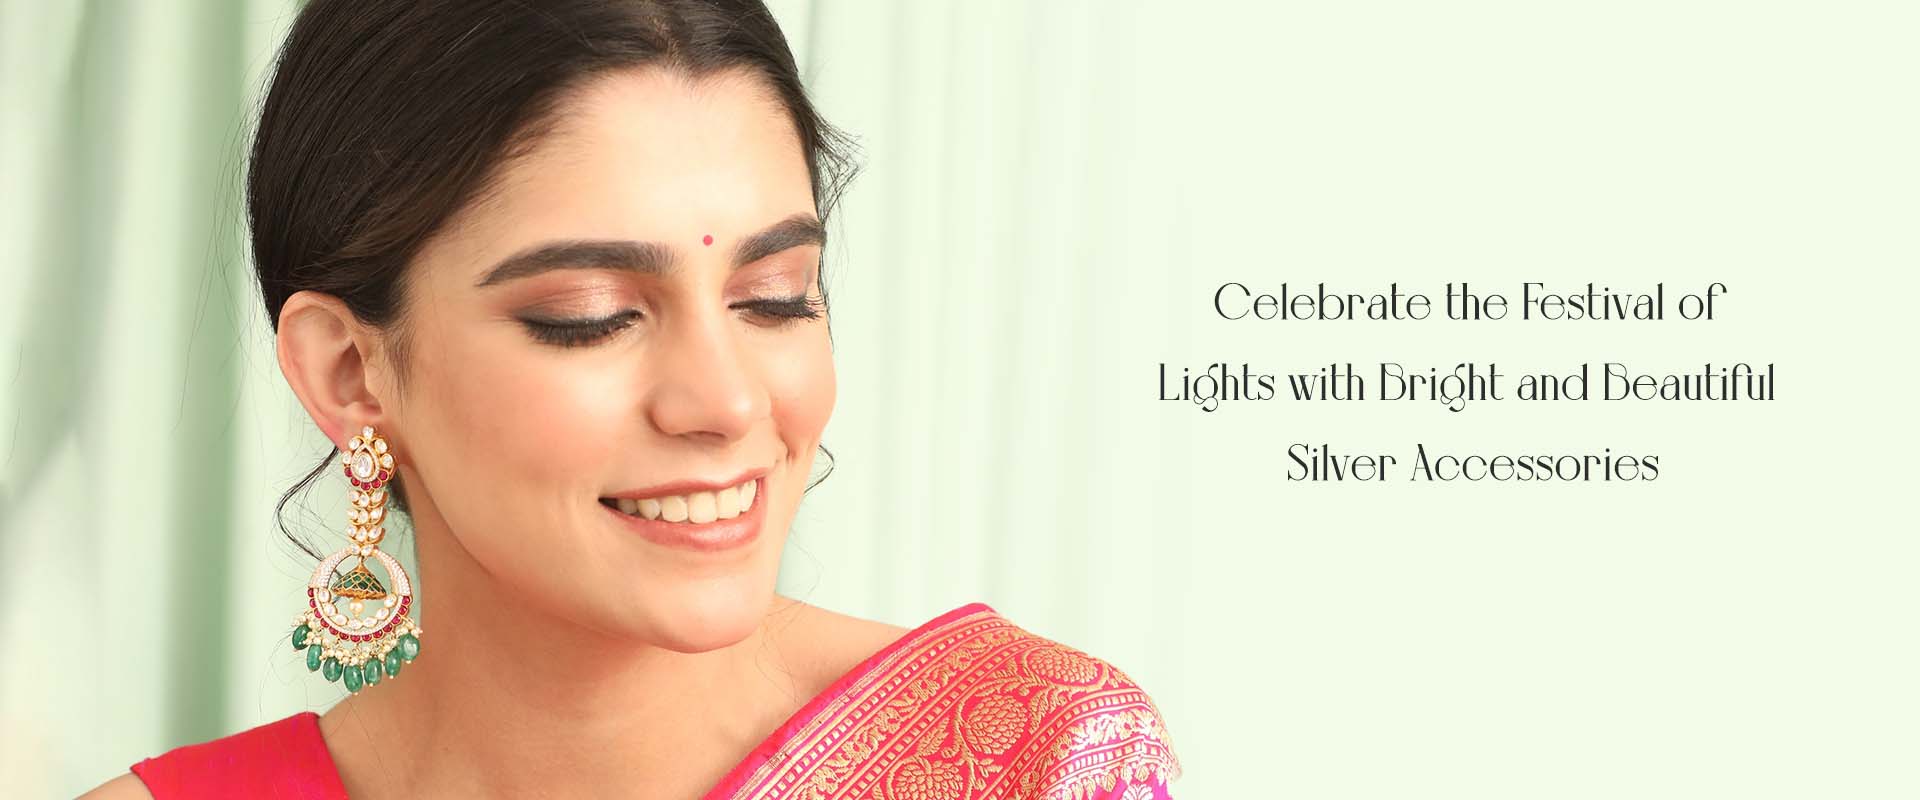 Celebrate the Festival of Lights with Bright and Beautiful Silver Accessories